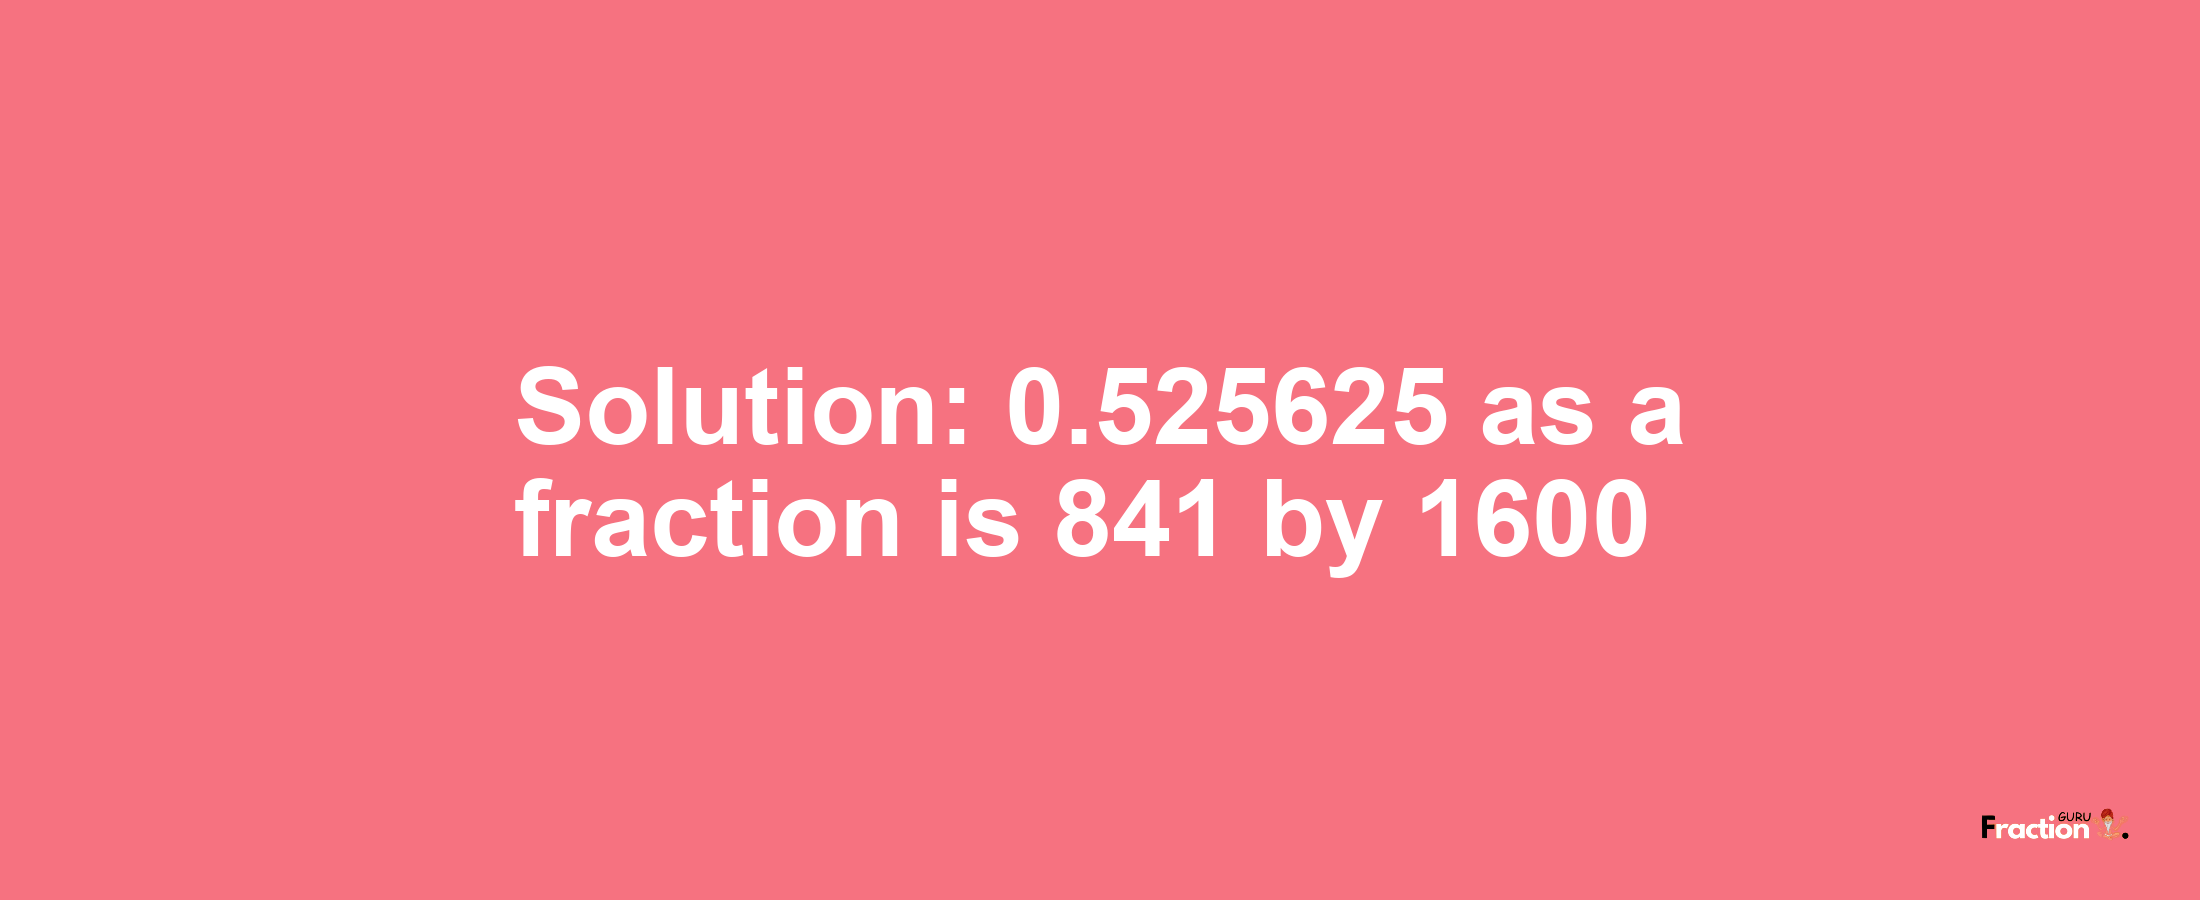 Solution:0.525625 as a fraction is 841/1600